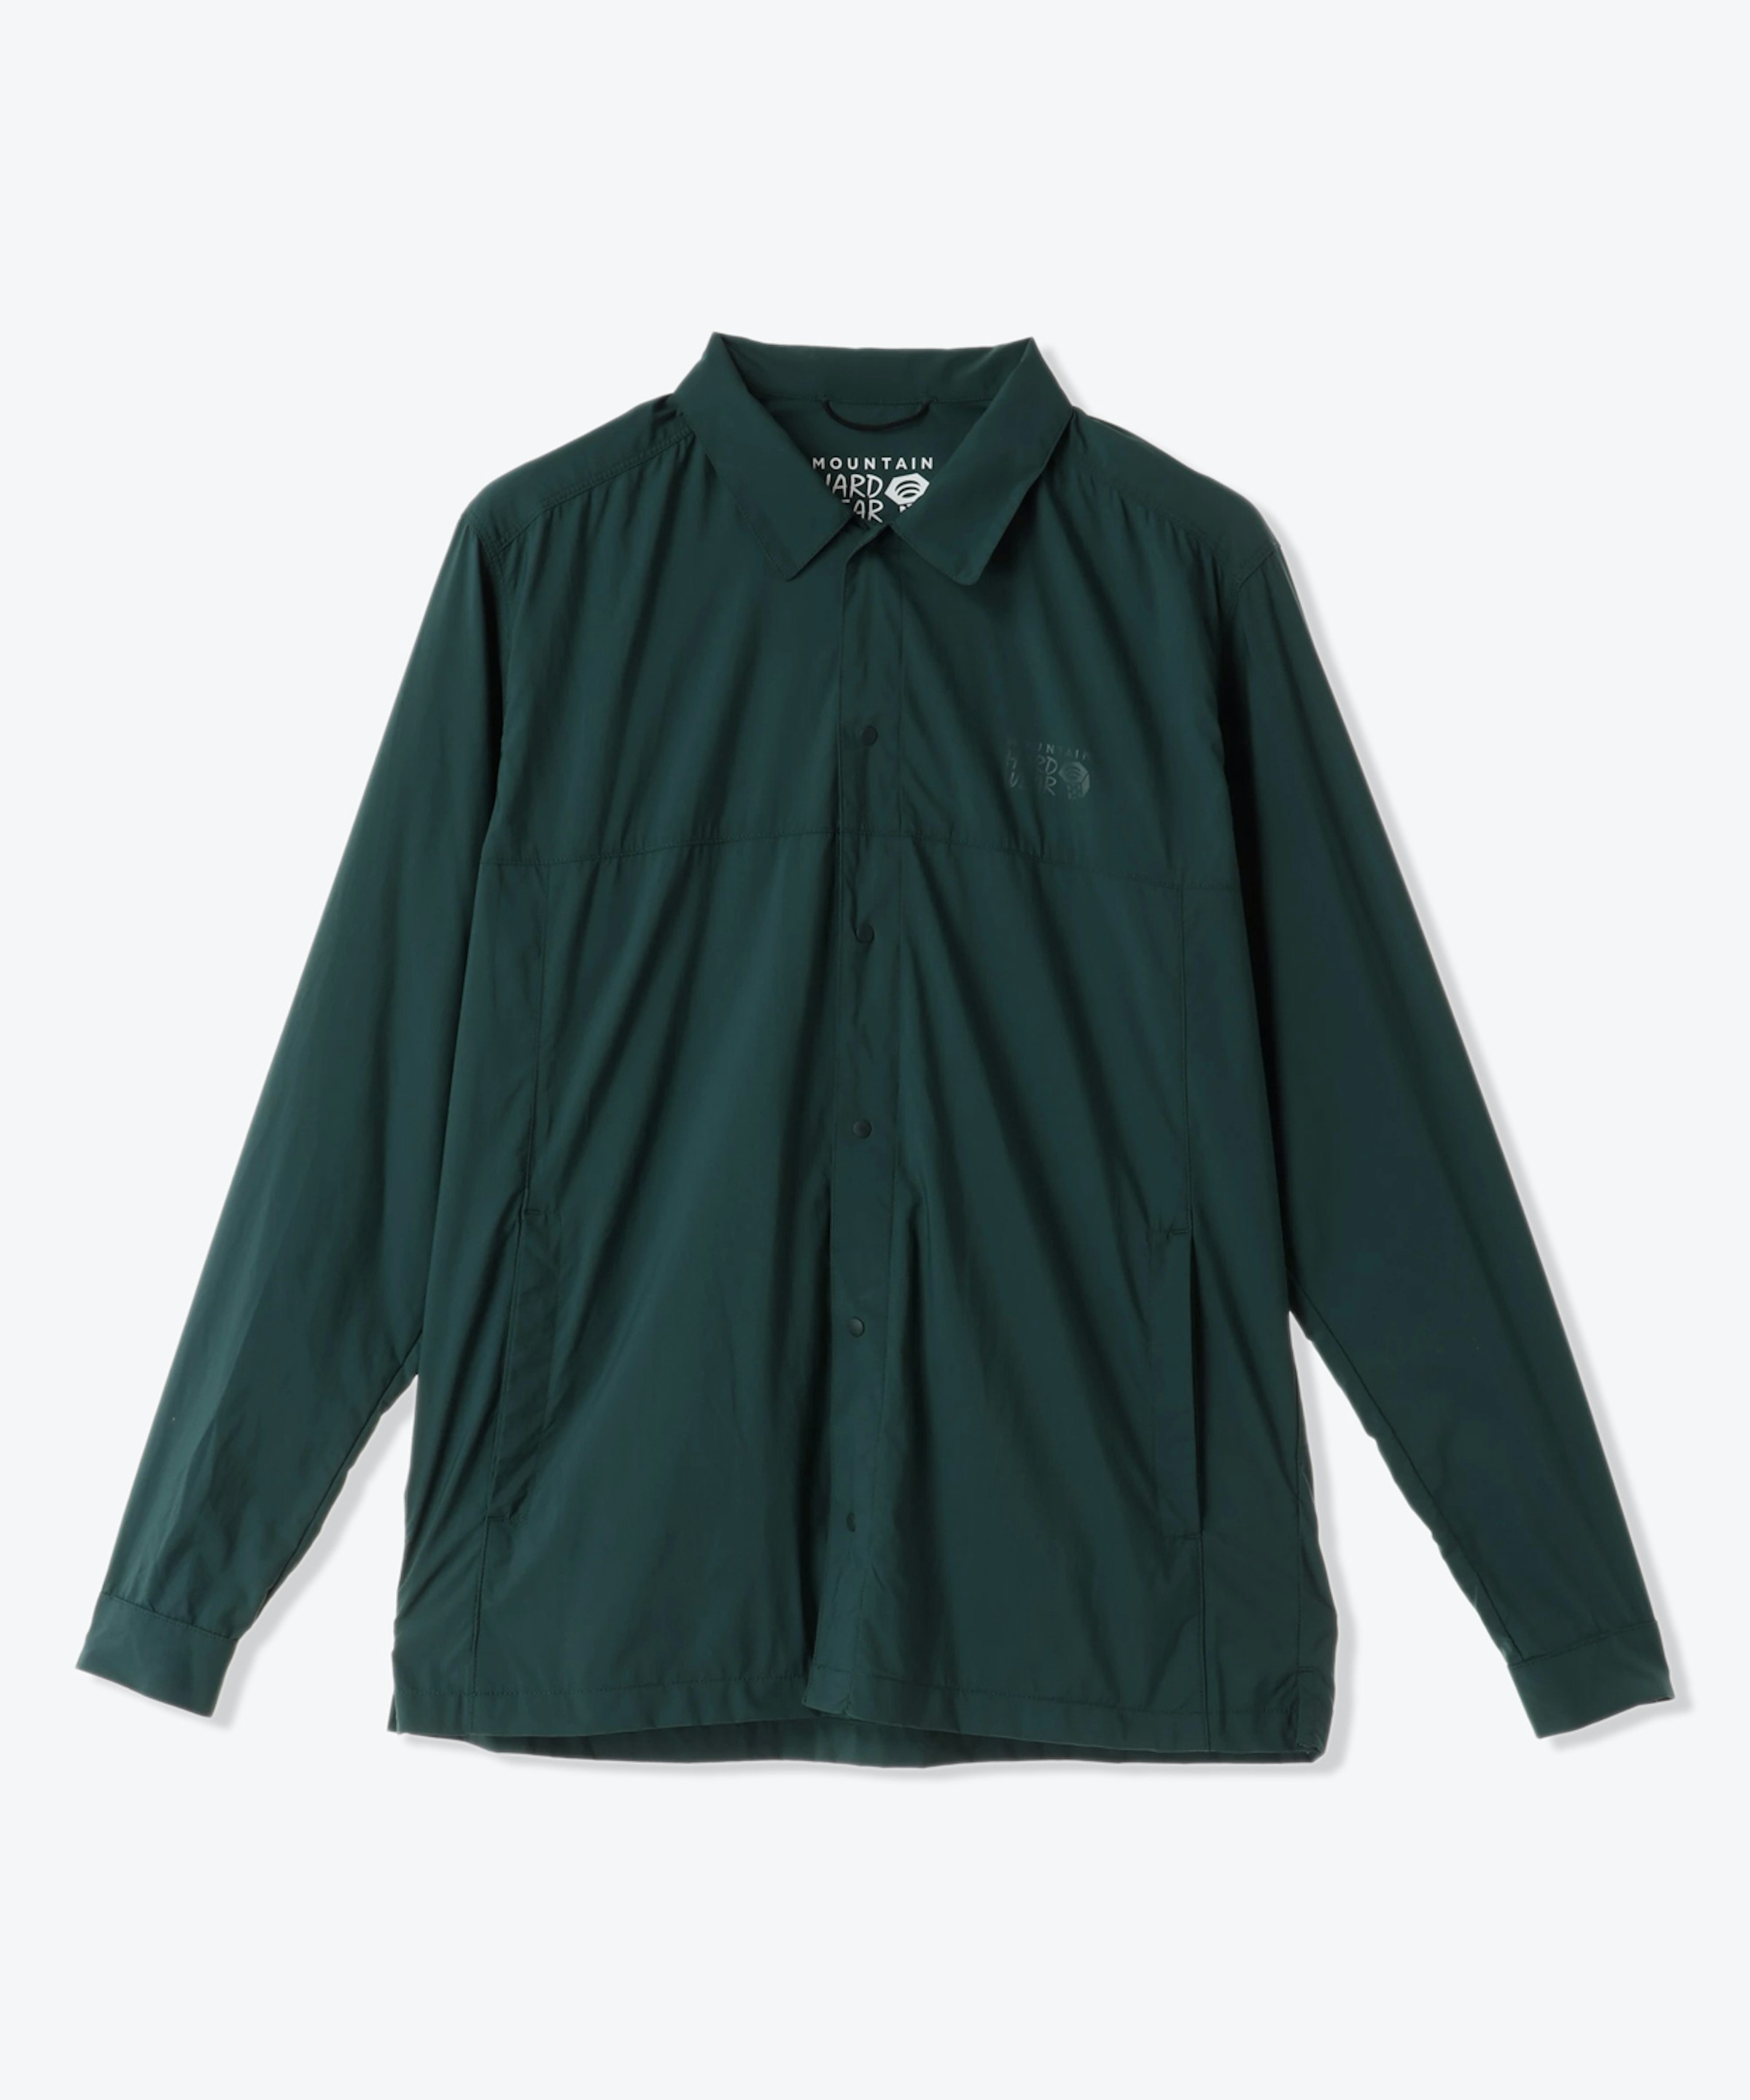 Kor AirShell Shirt Jacket, with the same material and functionality as the Kor AirShell Hoodie, priced at 19,800 yen (tax included). Available colors are Aqua Green and Stealth Grey, all two types. Sizes are XS, S, M, L, and XL, all five types. At 130g for a size L, it's lighter than the hoodie. To be released this spring.